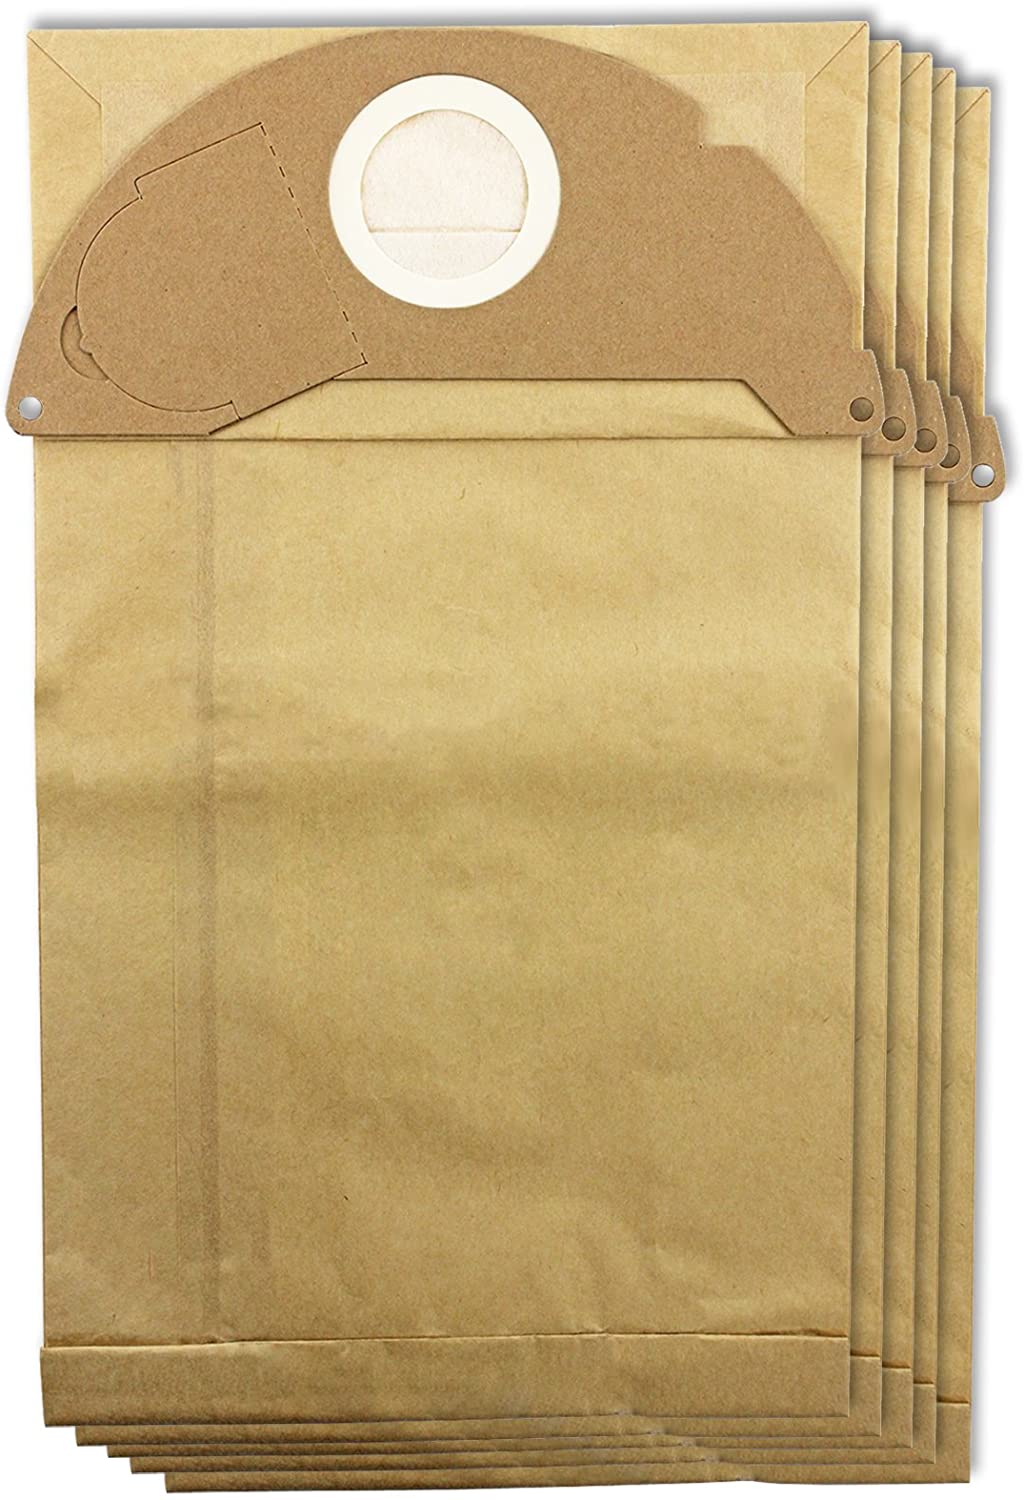 Strong Dust Bags for Karcher A2074PT WD2250 A2003 Vacuum Cleaners (Pack of 5)